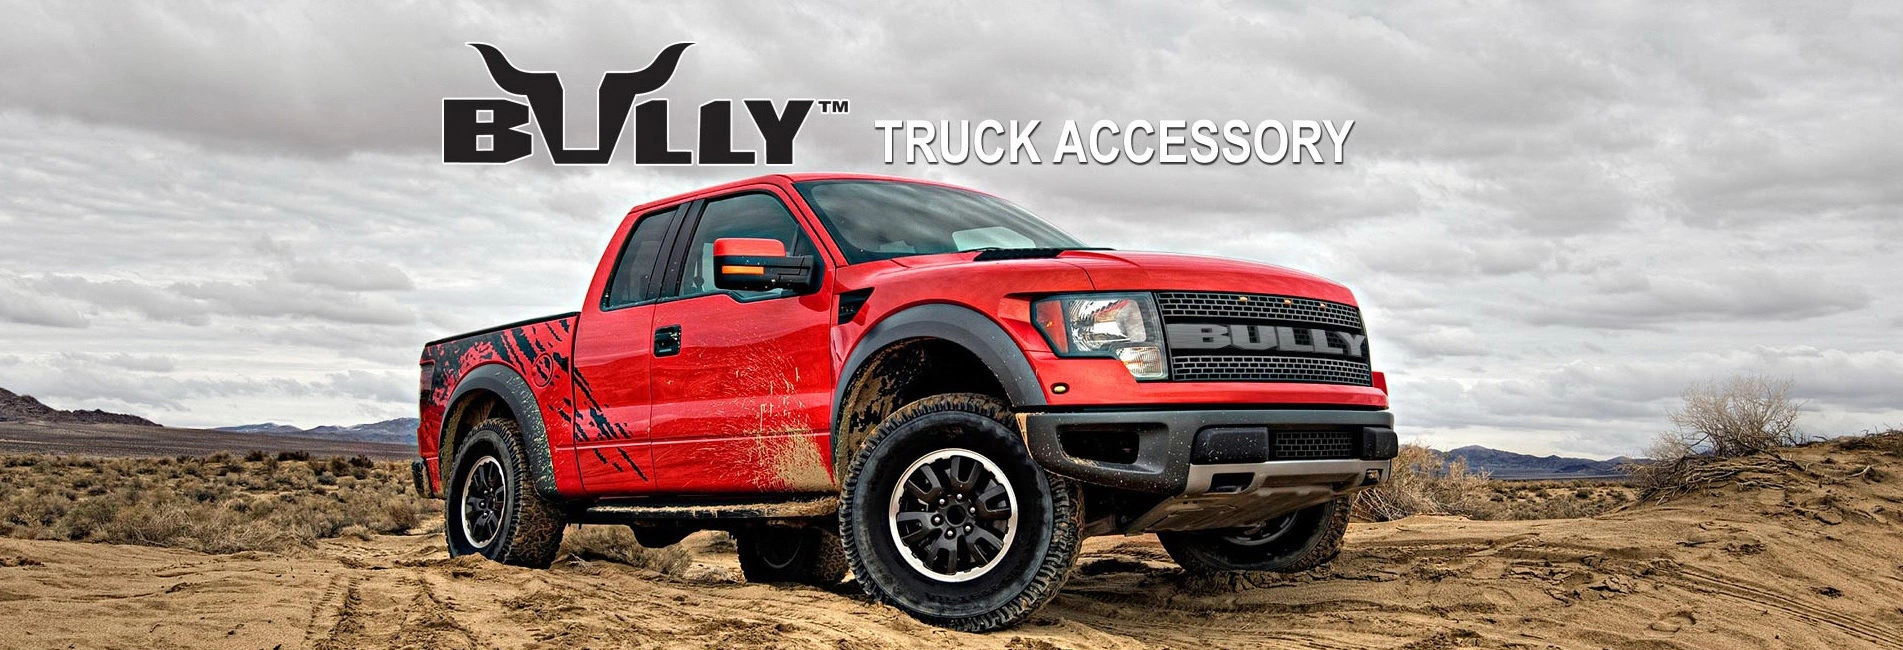 Bully truck accessories